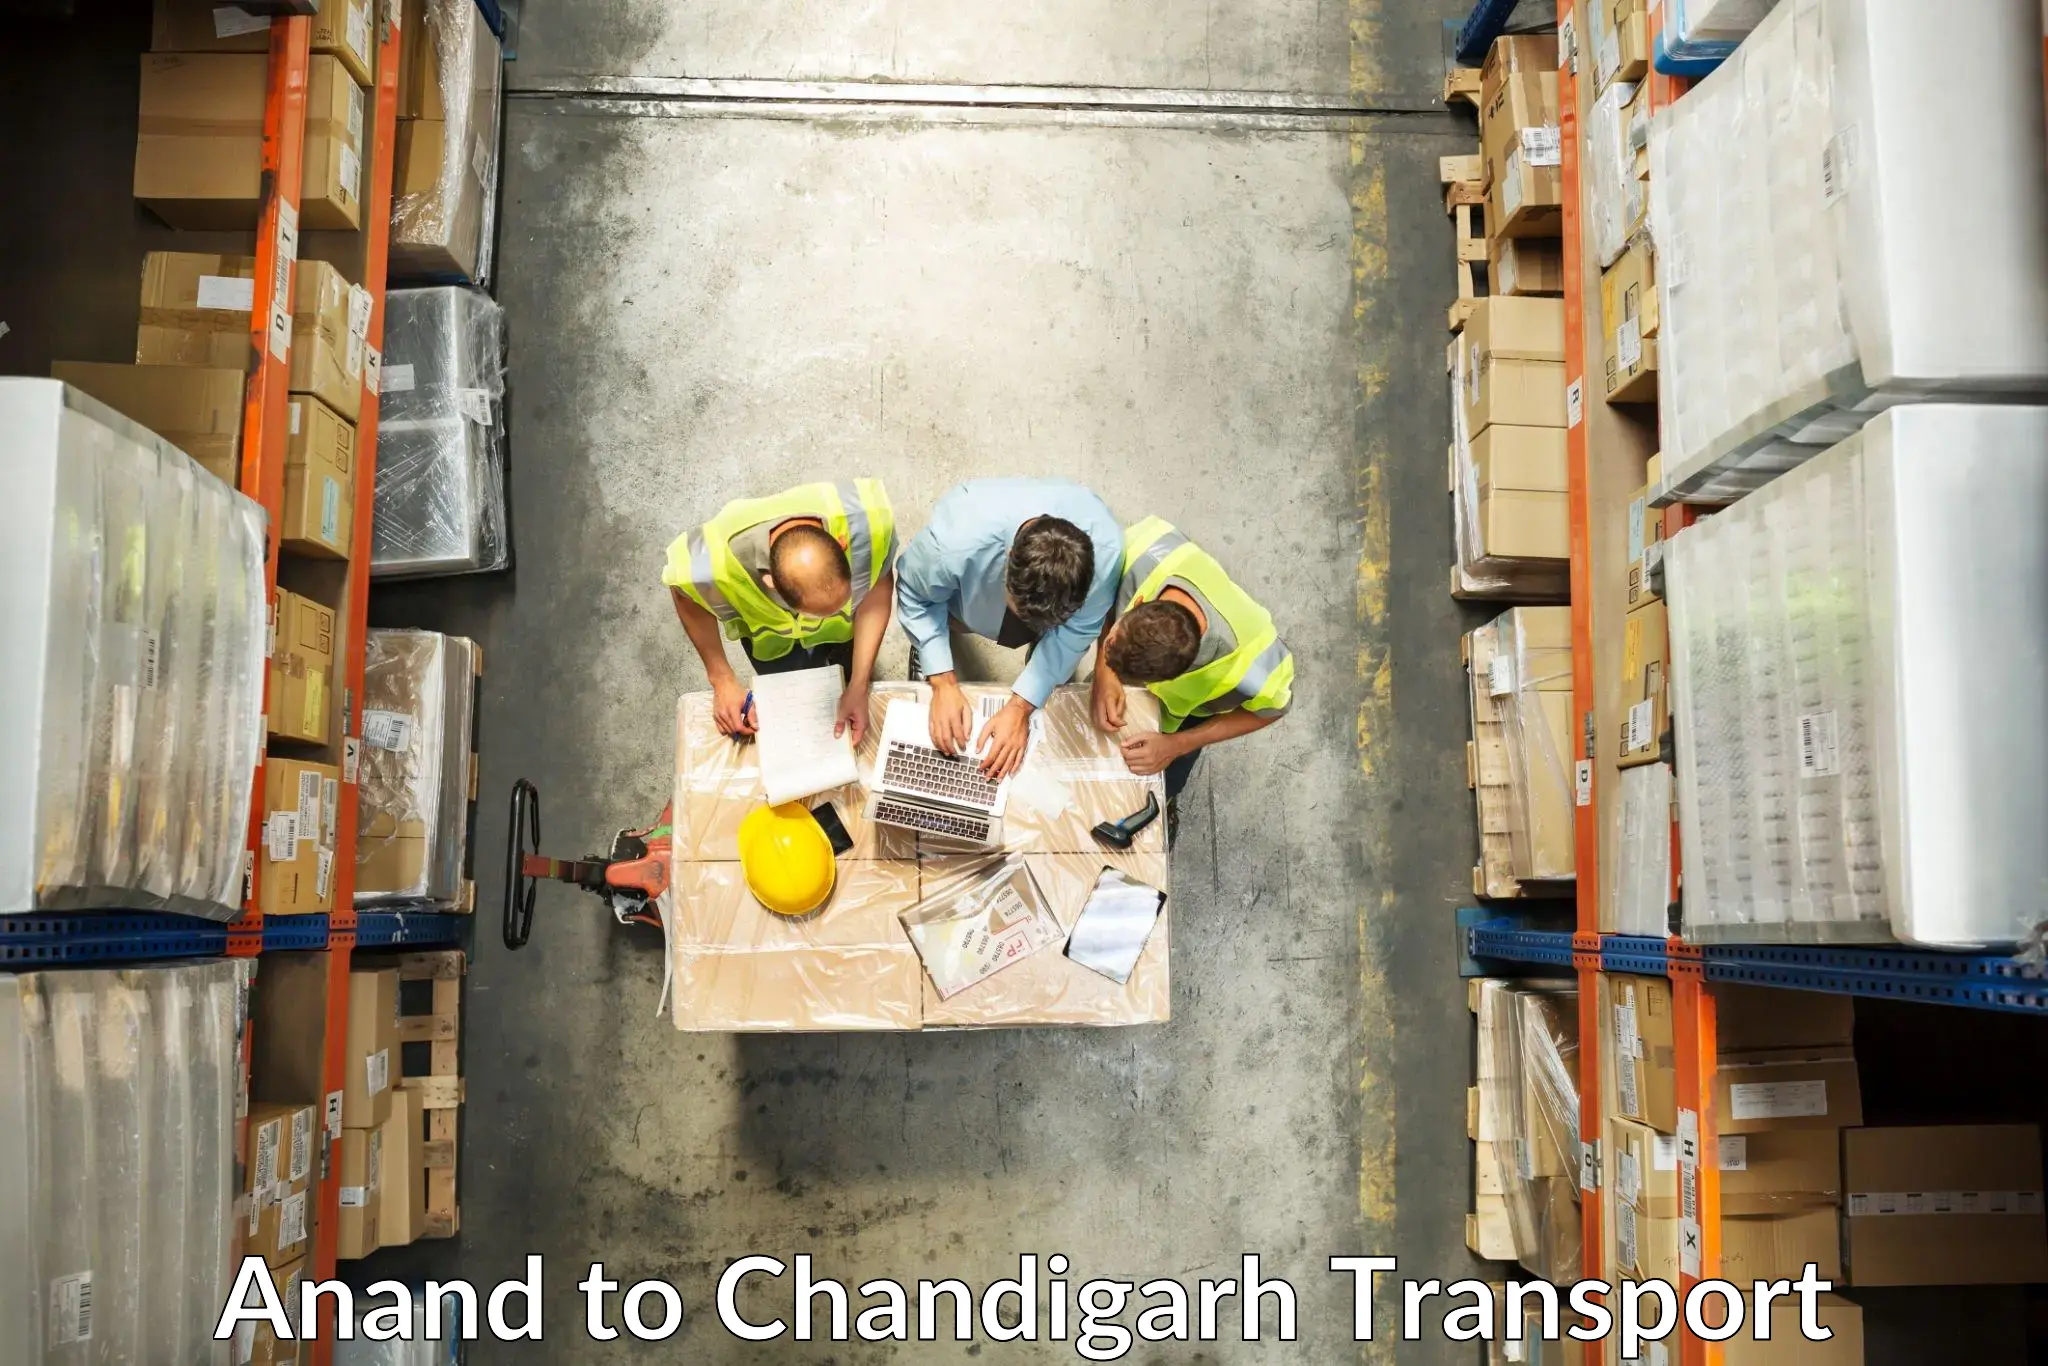 Furniture transport service Anand to Chandigarh